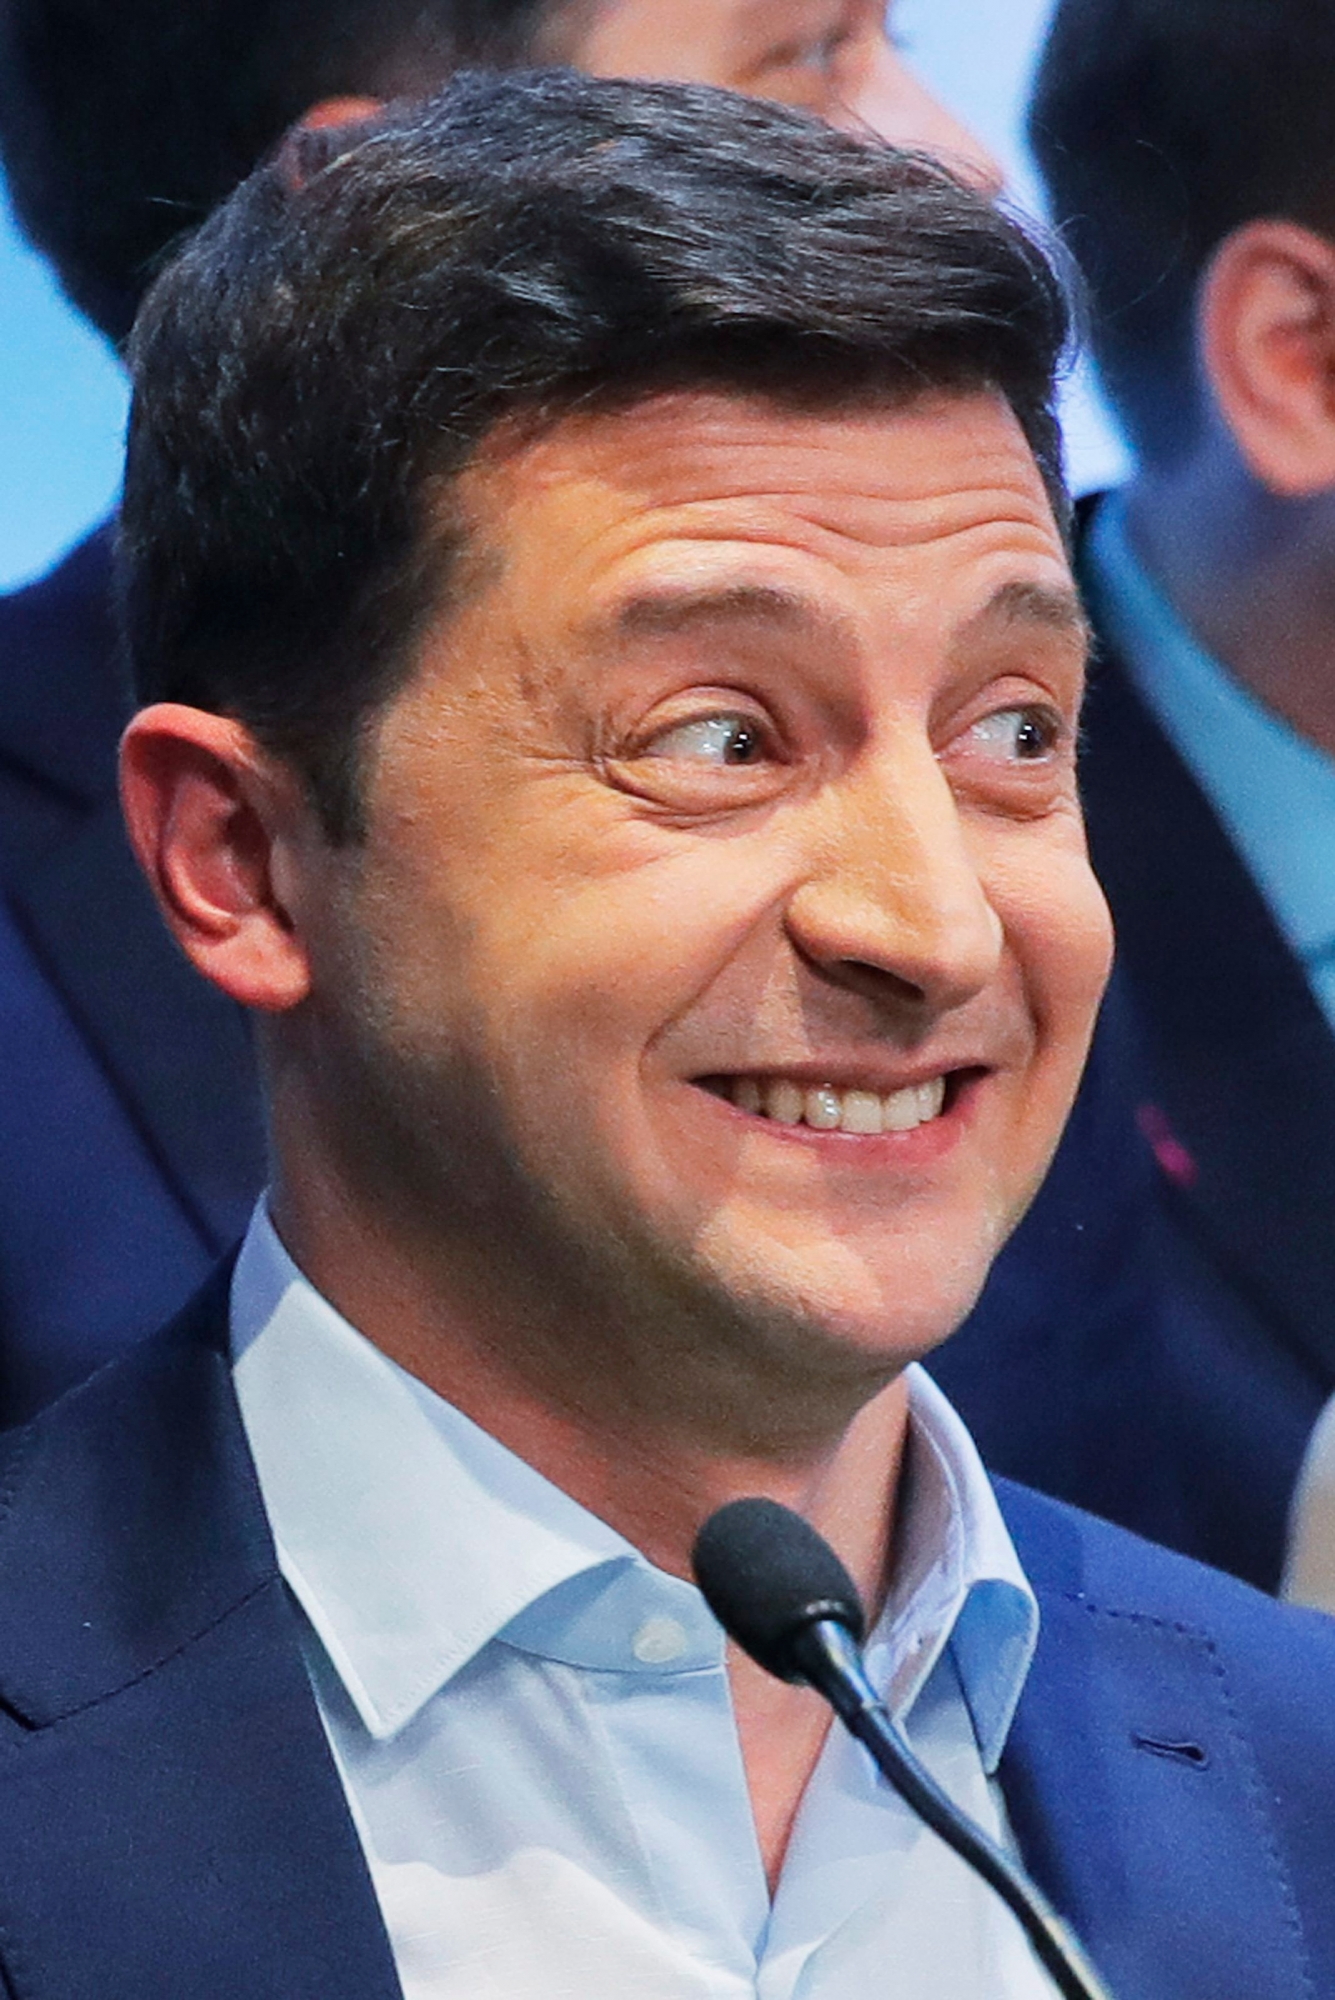 Ukrainian comedian and presidential candidate Volodymyr Zelenskiy smiles after the second round of presidential elections in Kiev, Ukraine, Sunday, April 21, 2019. Ukrainians voted on Sunday in a presidential runoff as the nation's incumbent leader struggles to fend off a strong challenge by a comedian who denounces corruption and plays the role of president in a TV sitcom. (AP Photo/Vadim Ghirda) Ukraine Election